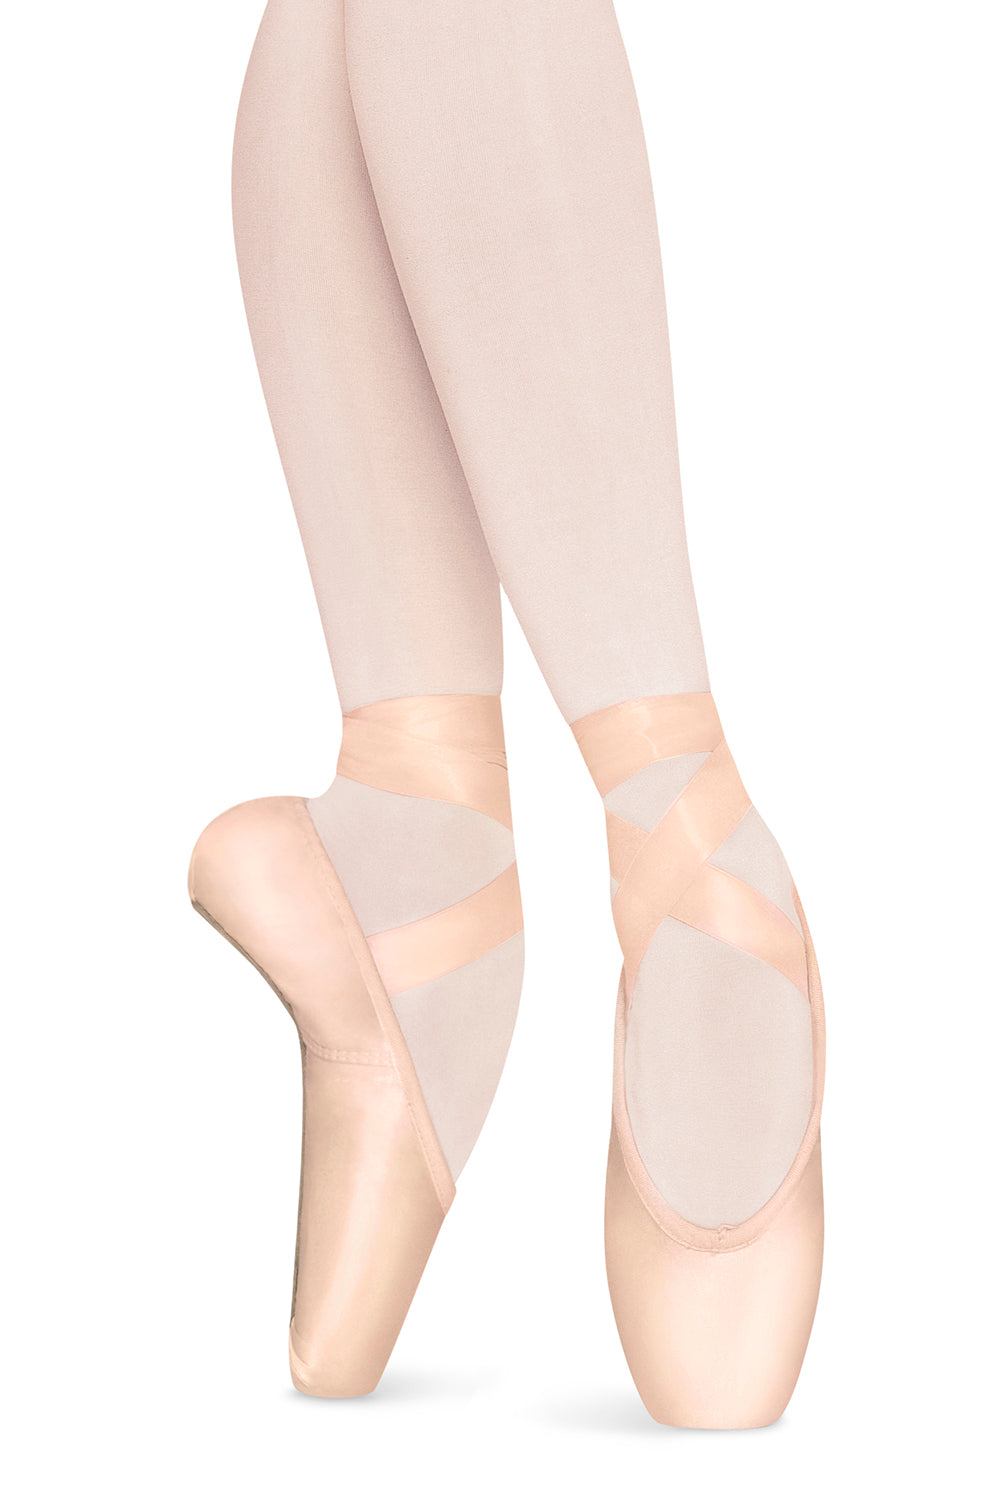 Bloch Signature Rehearsal Pointe Shoes, Pink Satin